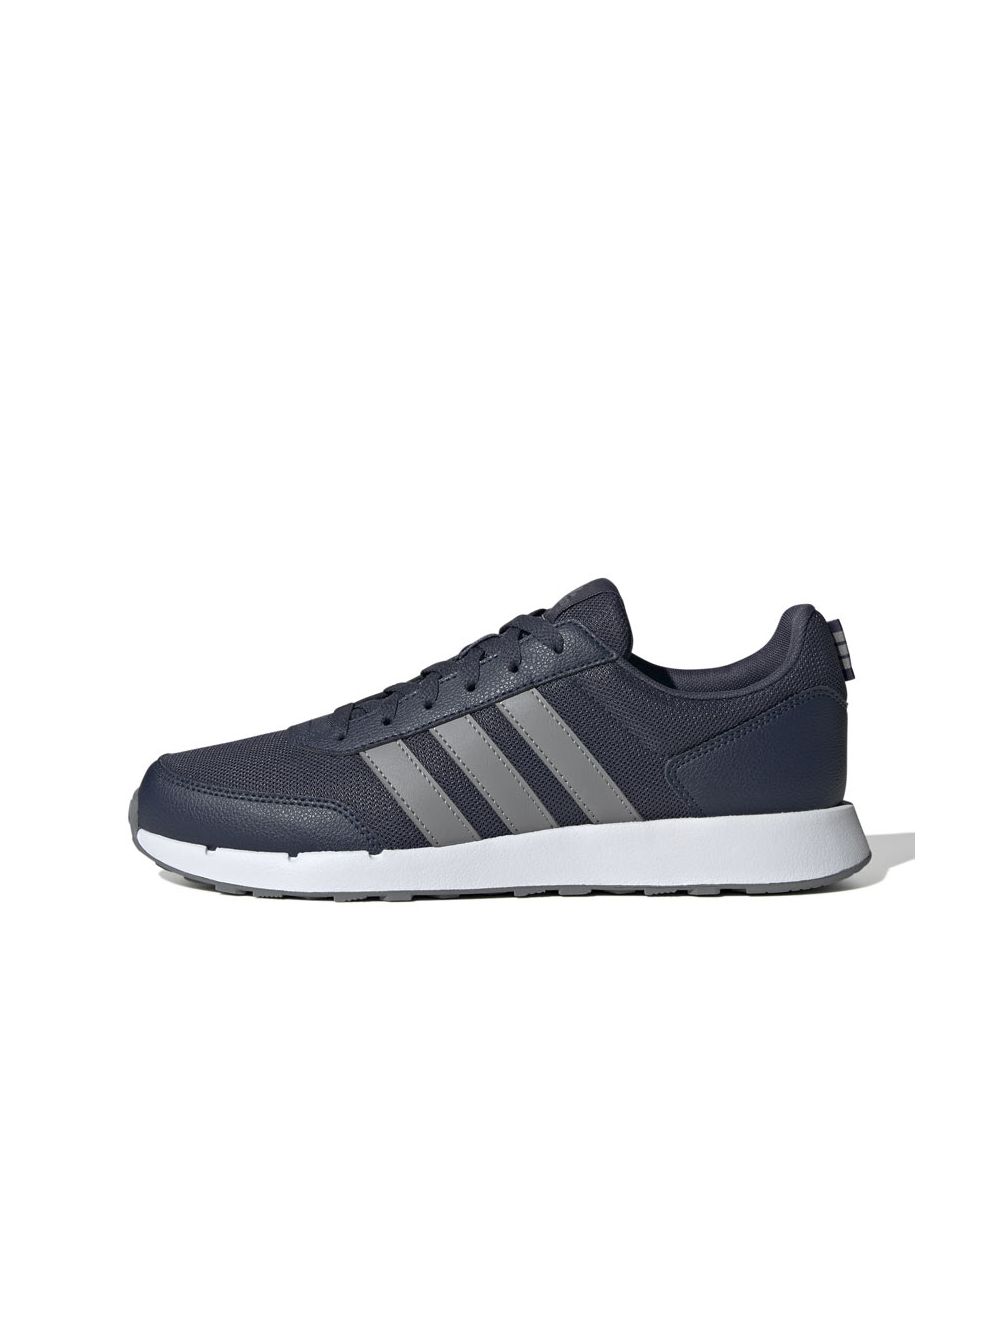 adidas Performance Run 50s Mens Shoes Navy/Ink